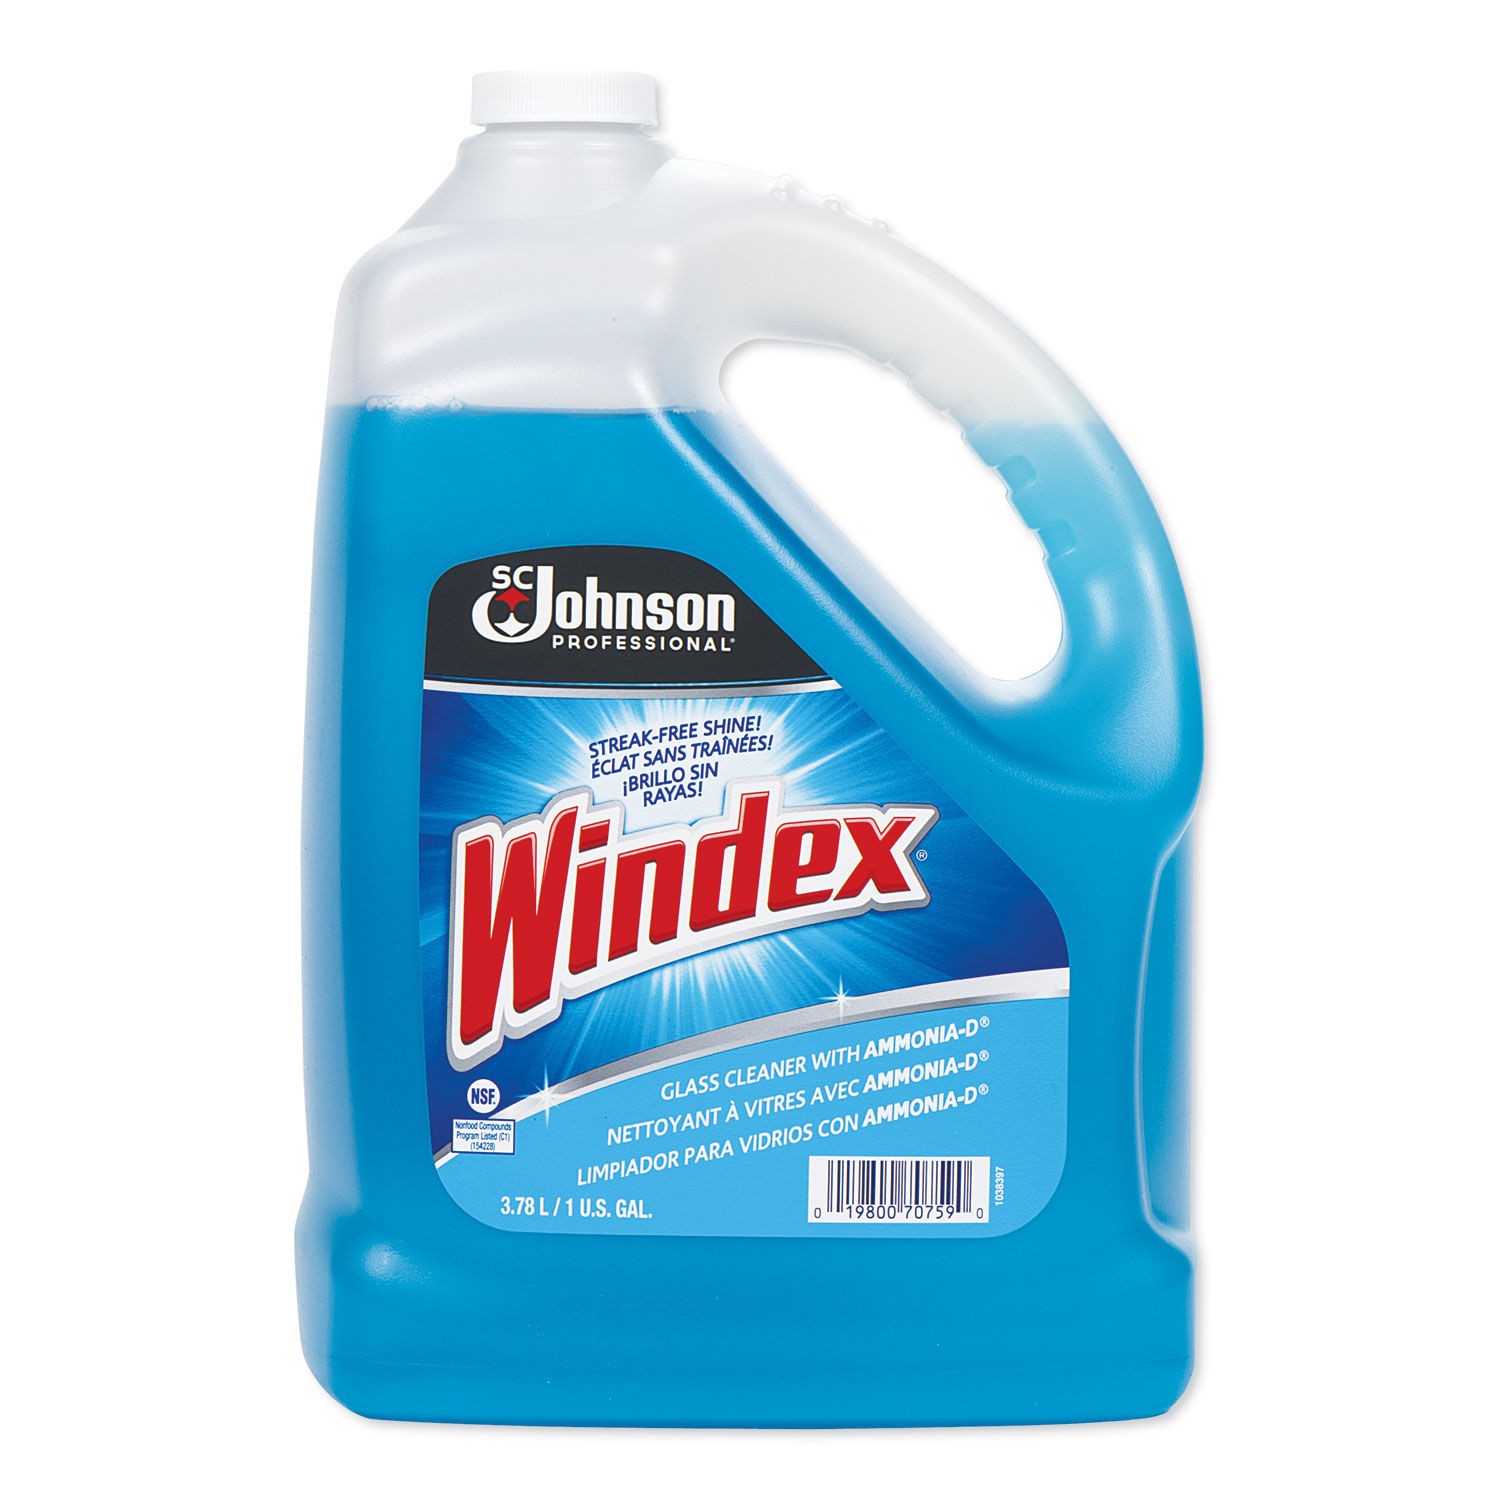 Windex Glass Cleaner with Ammonia-D, 1 Gallon Bottle, 4/Carton